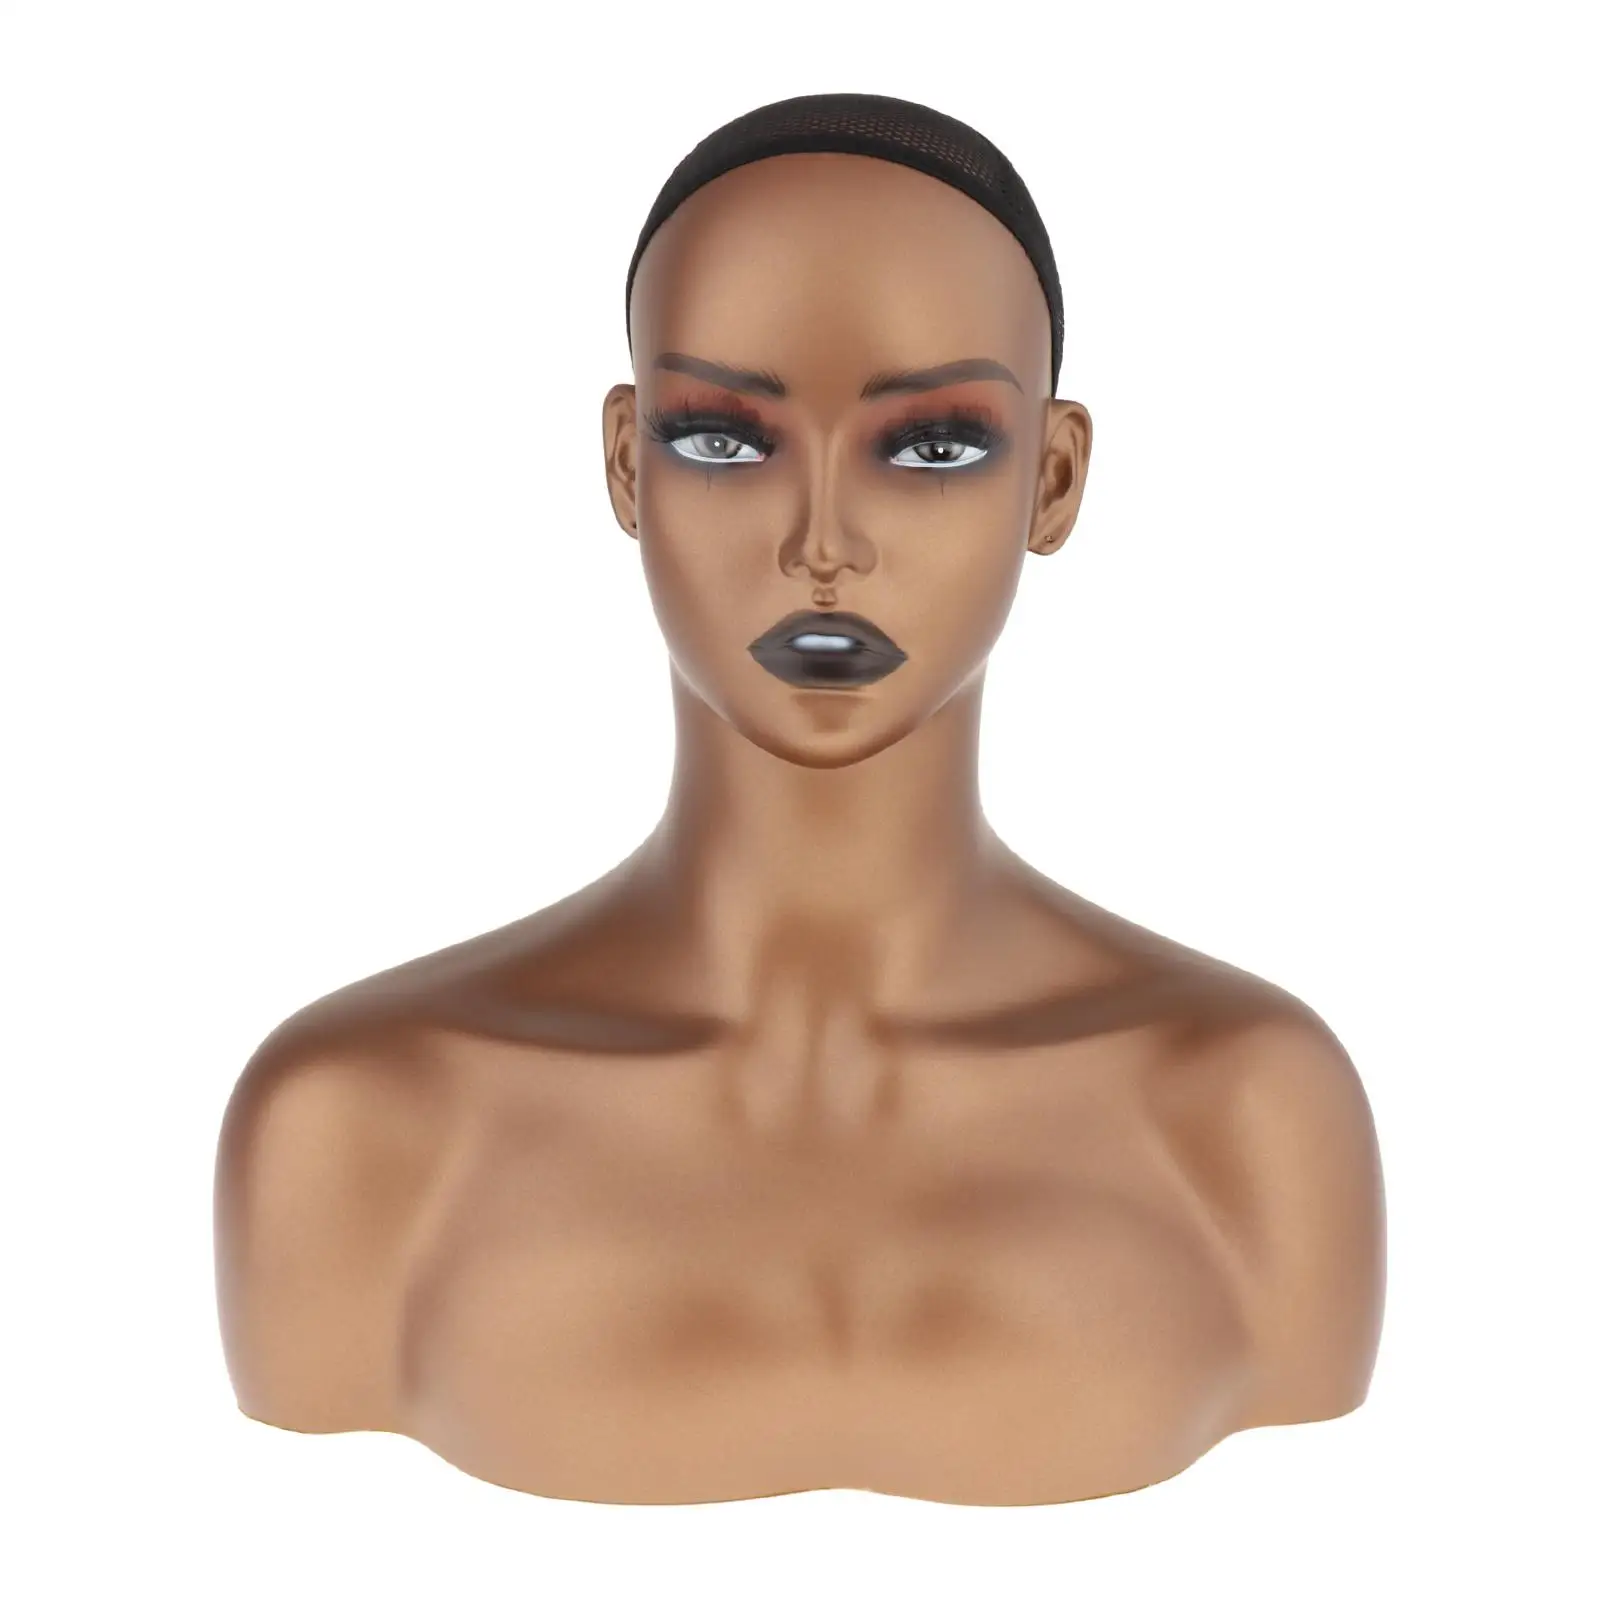 Realistic Female Mannequin Head with Shoulder for Necklace Earrings Wigs Displaying Making Styling Beauty Accessories Displaying